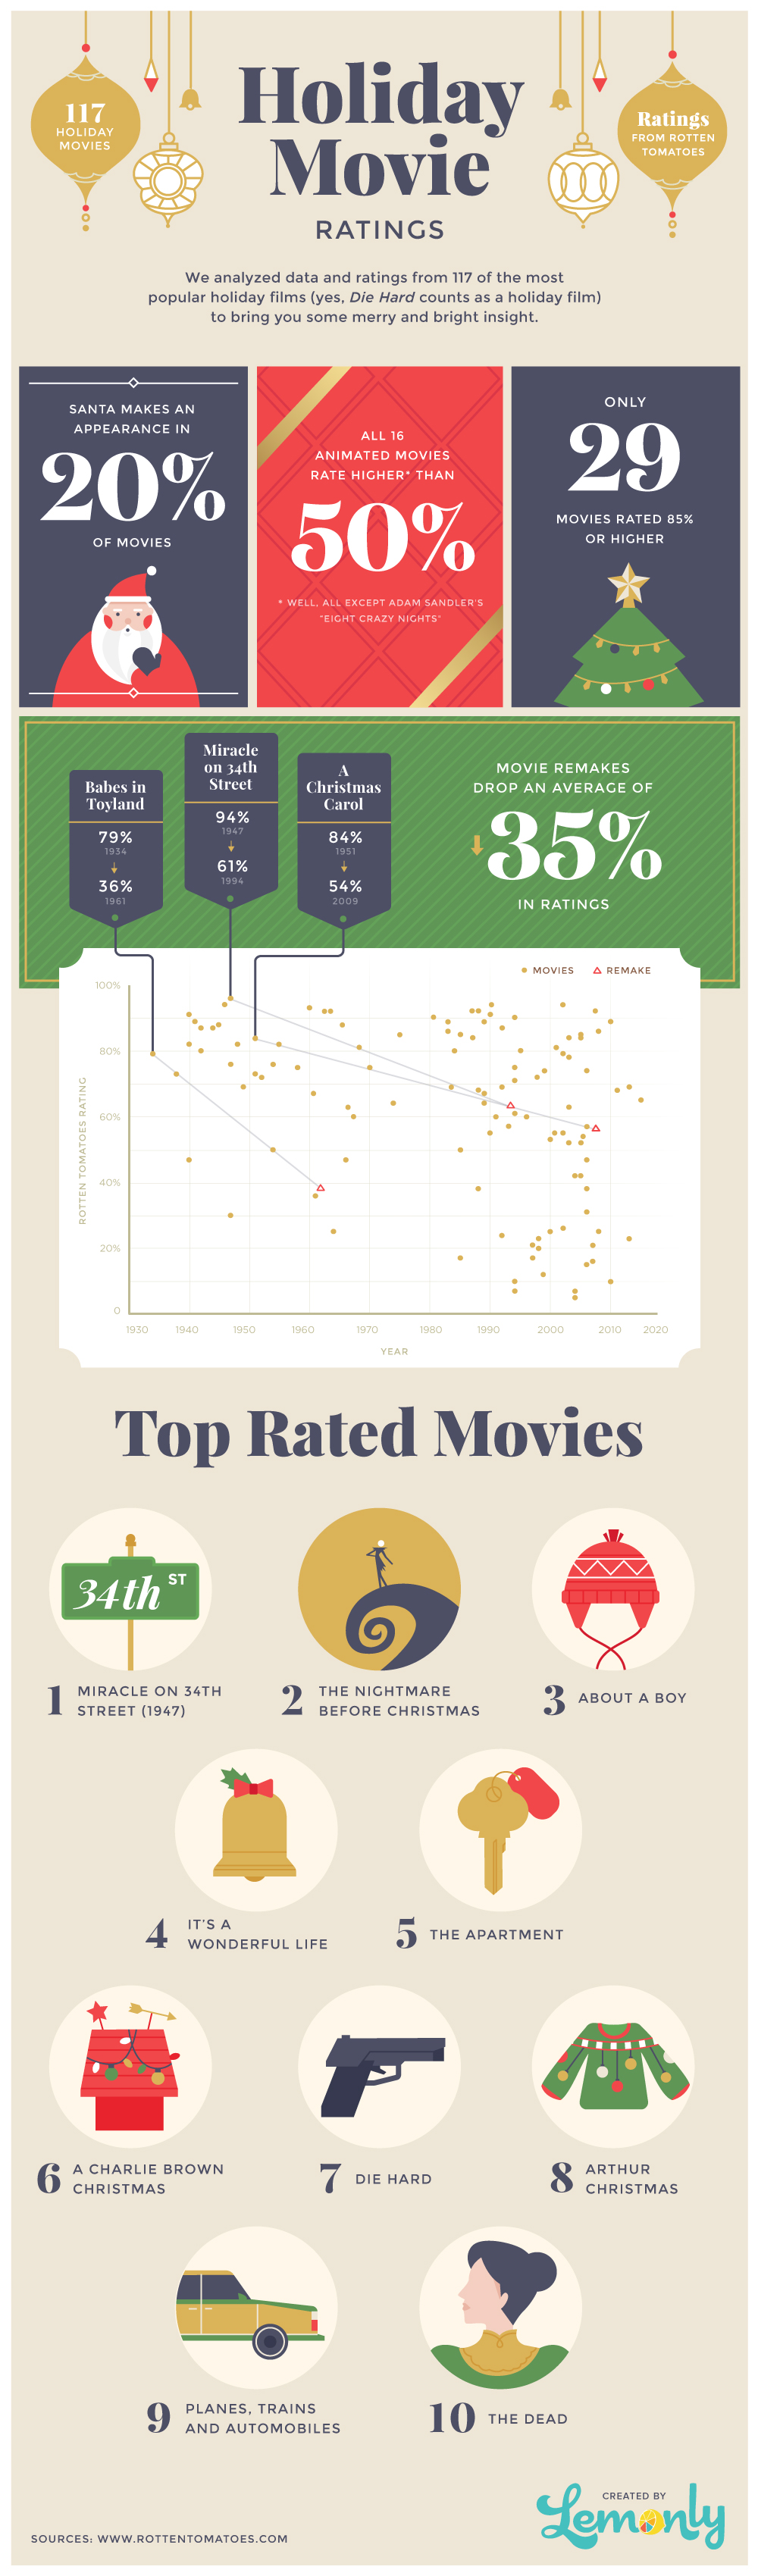 Holiday Movie Ratings